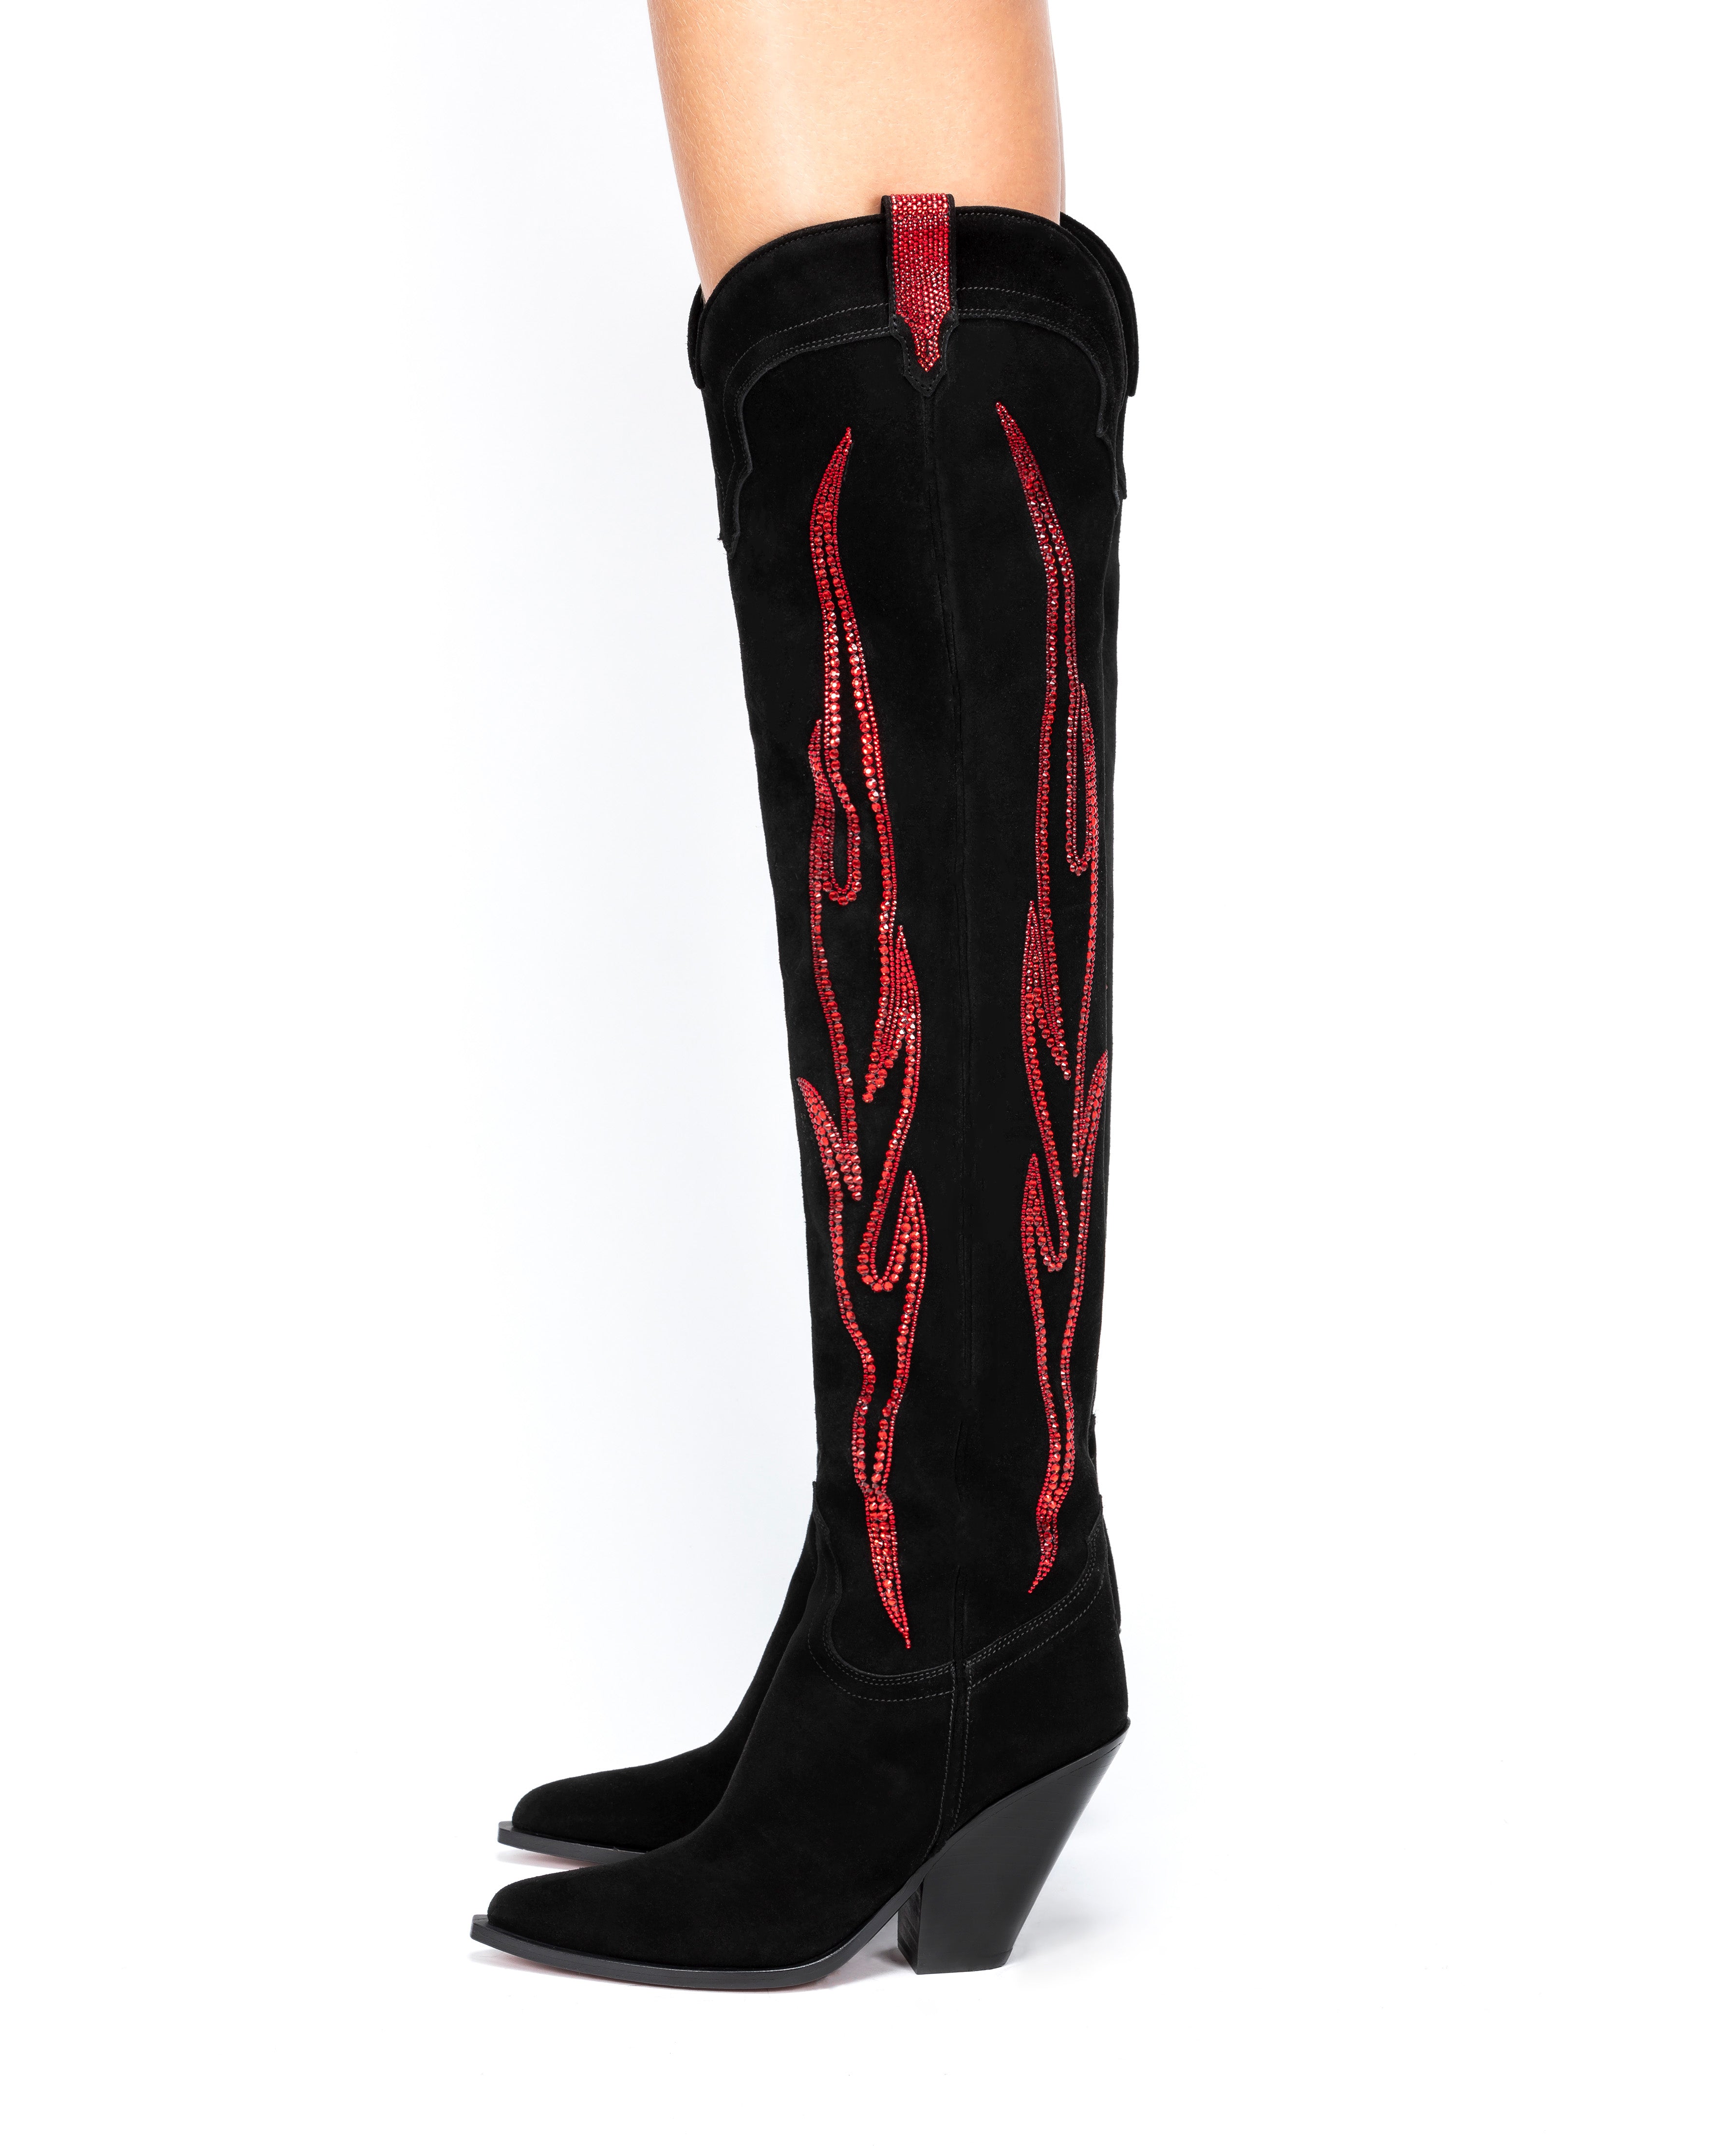 HERMOSA-90-Women_s-Over-The-Knee-Boots-in-Black-Suede-with-Red-Swarovski-Crystals_06